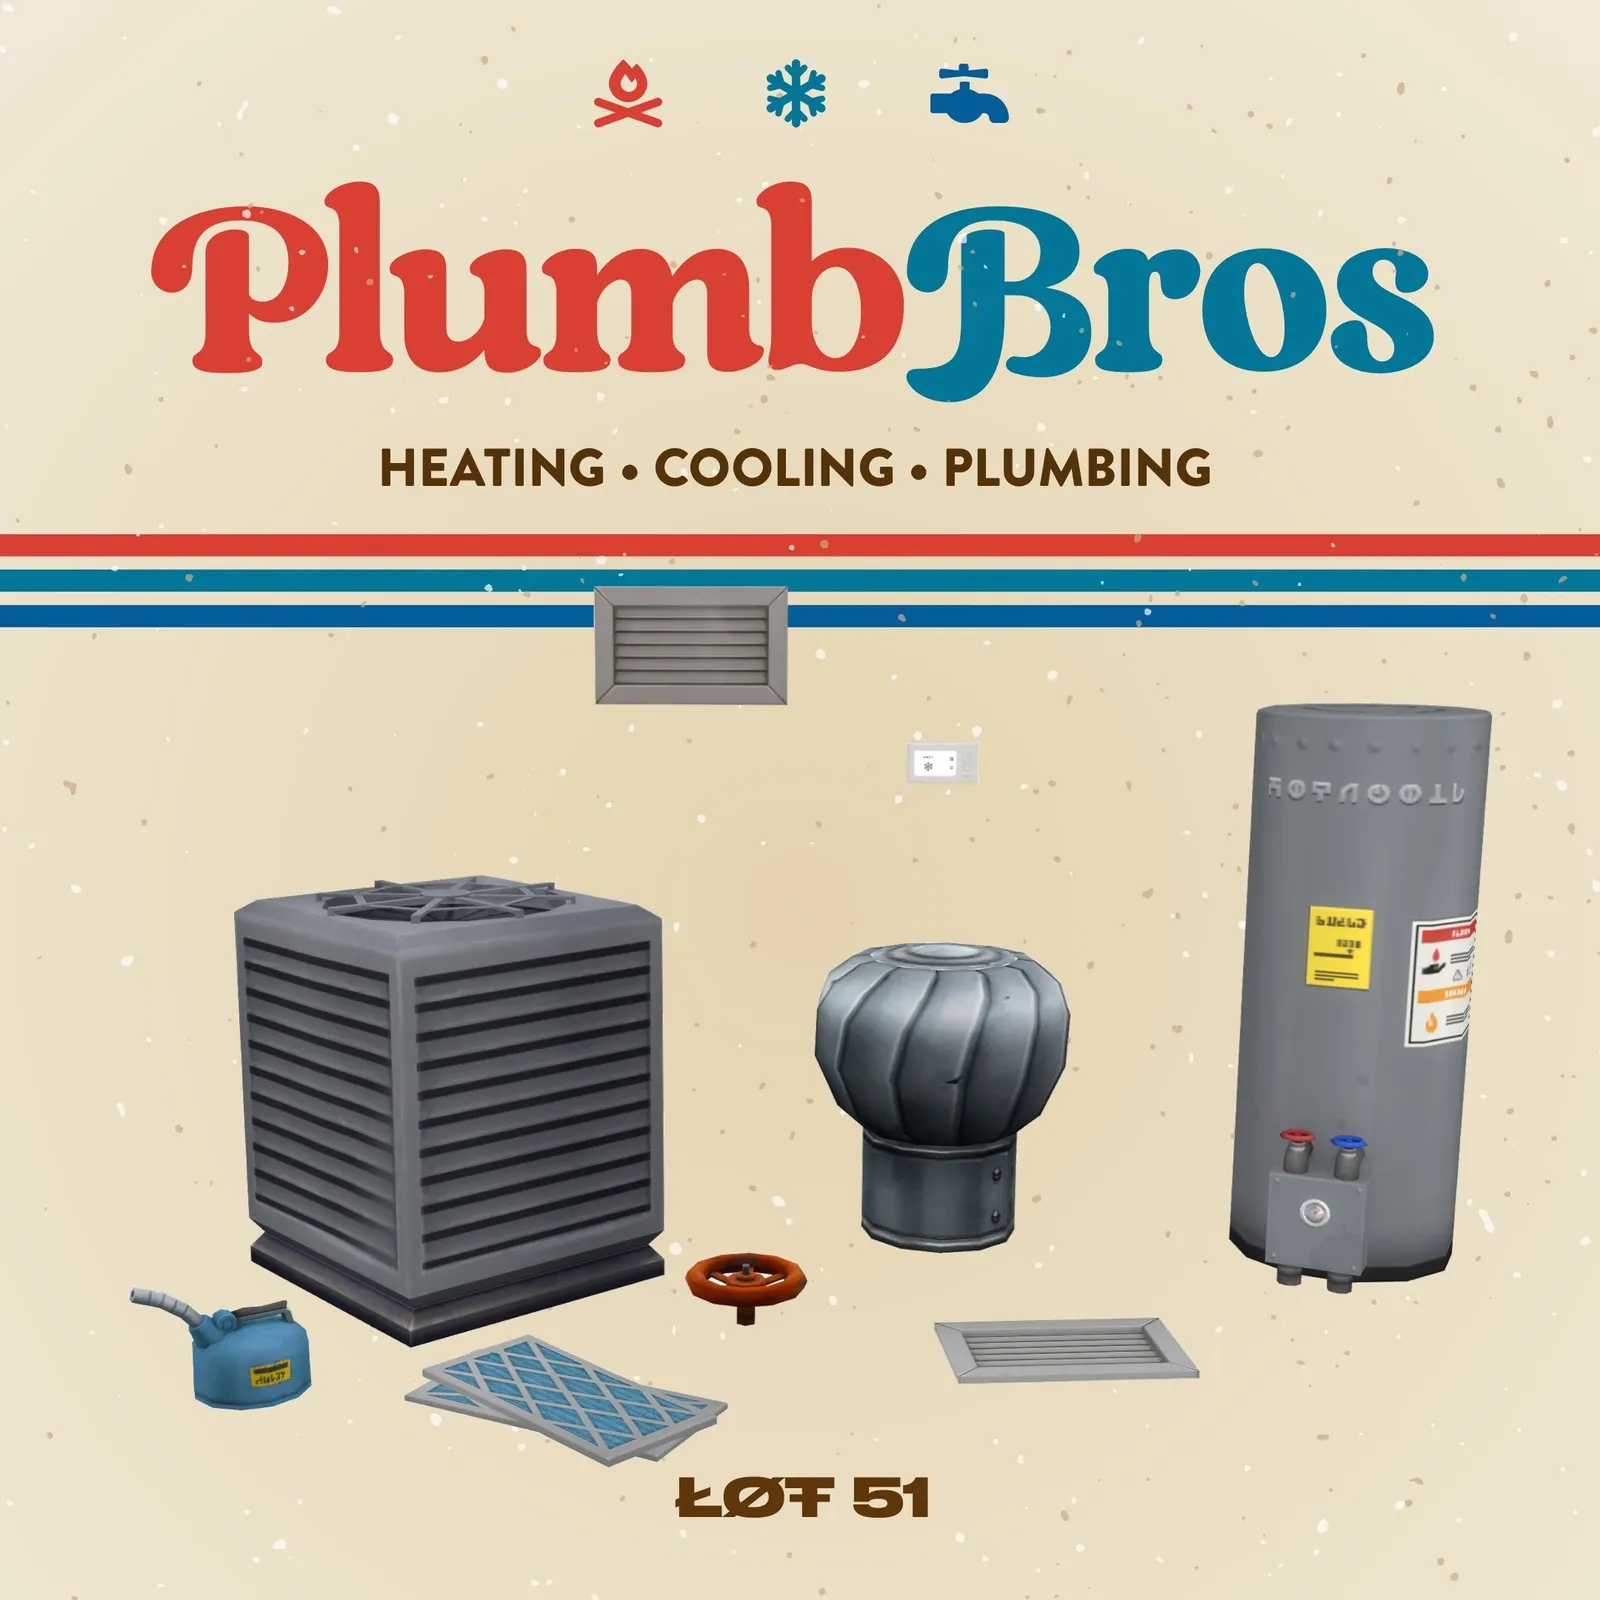 PlumbBros Heating • Cooling • Plumbing (Early Access until July 29)